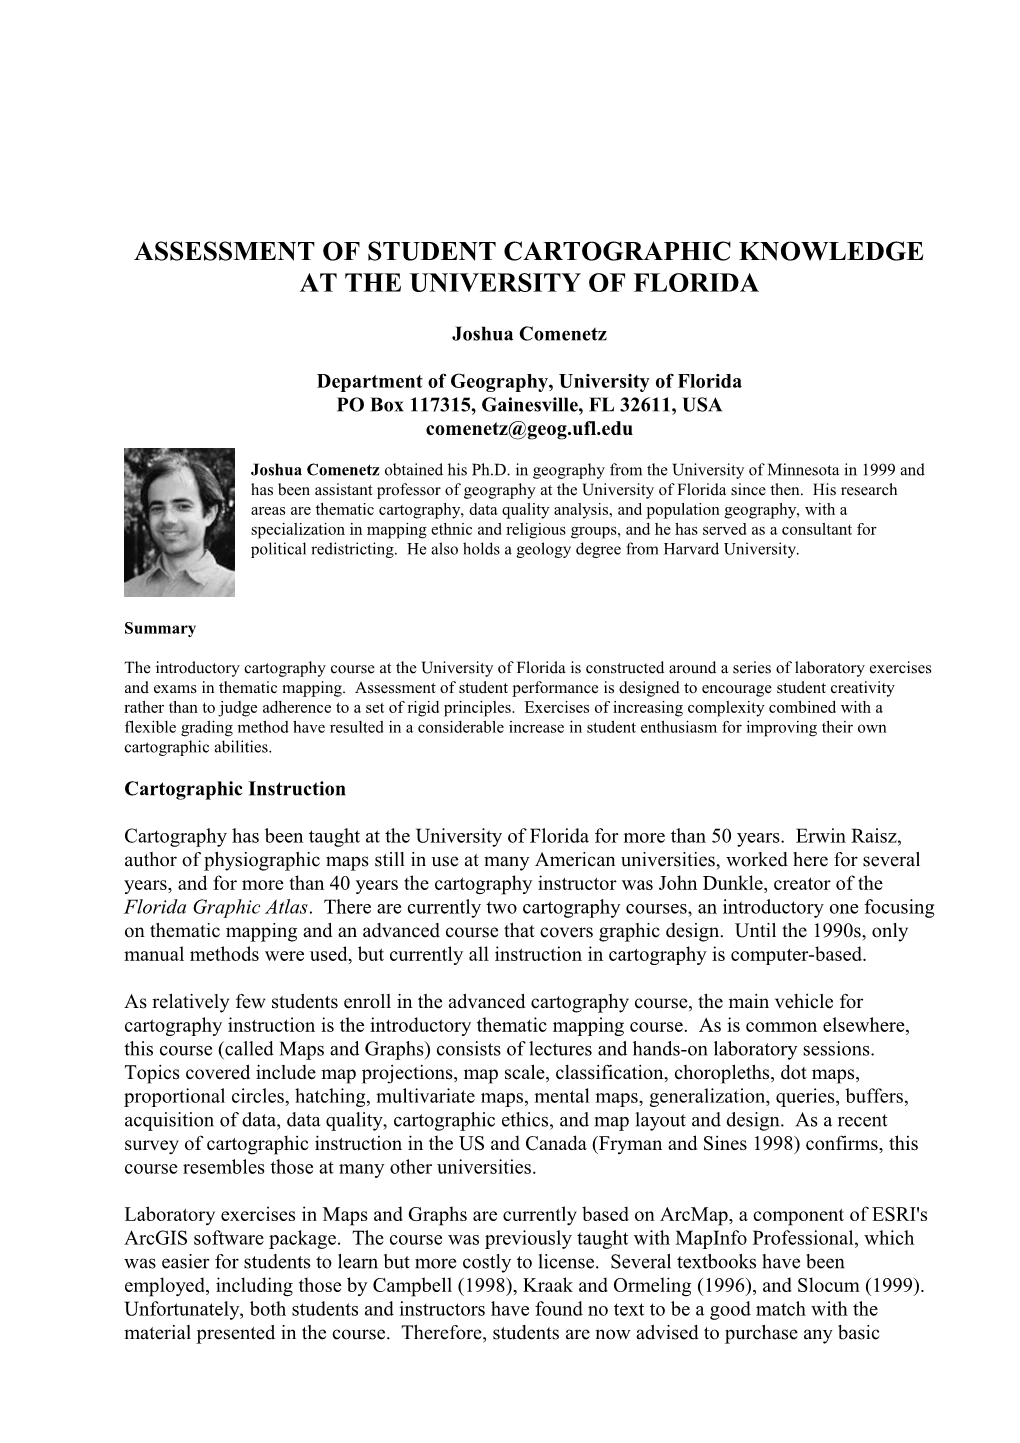 Assessment of Student Cartographic Knowledge at the University of Florida